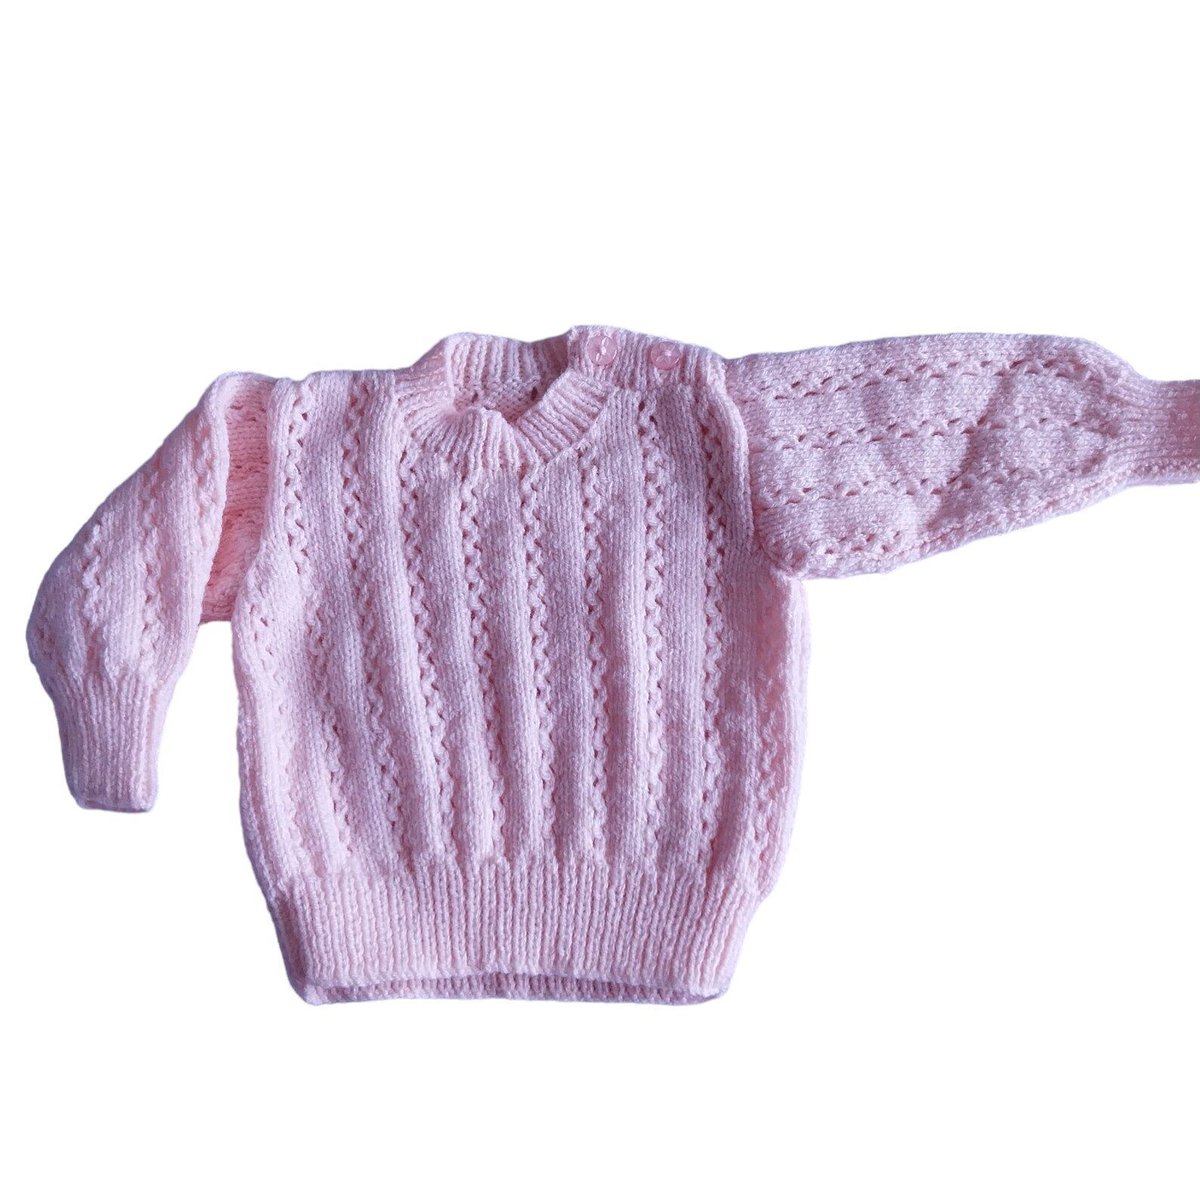 Discover the charm of hand knitted baby clothes with this adorable pale pink jumper. Designed to fit a 20-inch chest. Shop now on #Etsy. #Handmade #Knitwear knittingtopia.etsy.com/listing/168093… #knittingtopia #craftbizparty #MHHSBD #britishcraft #shopindy